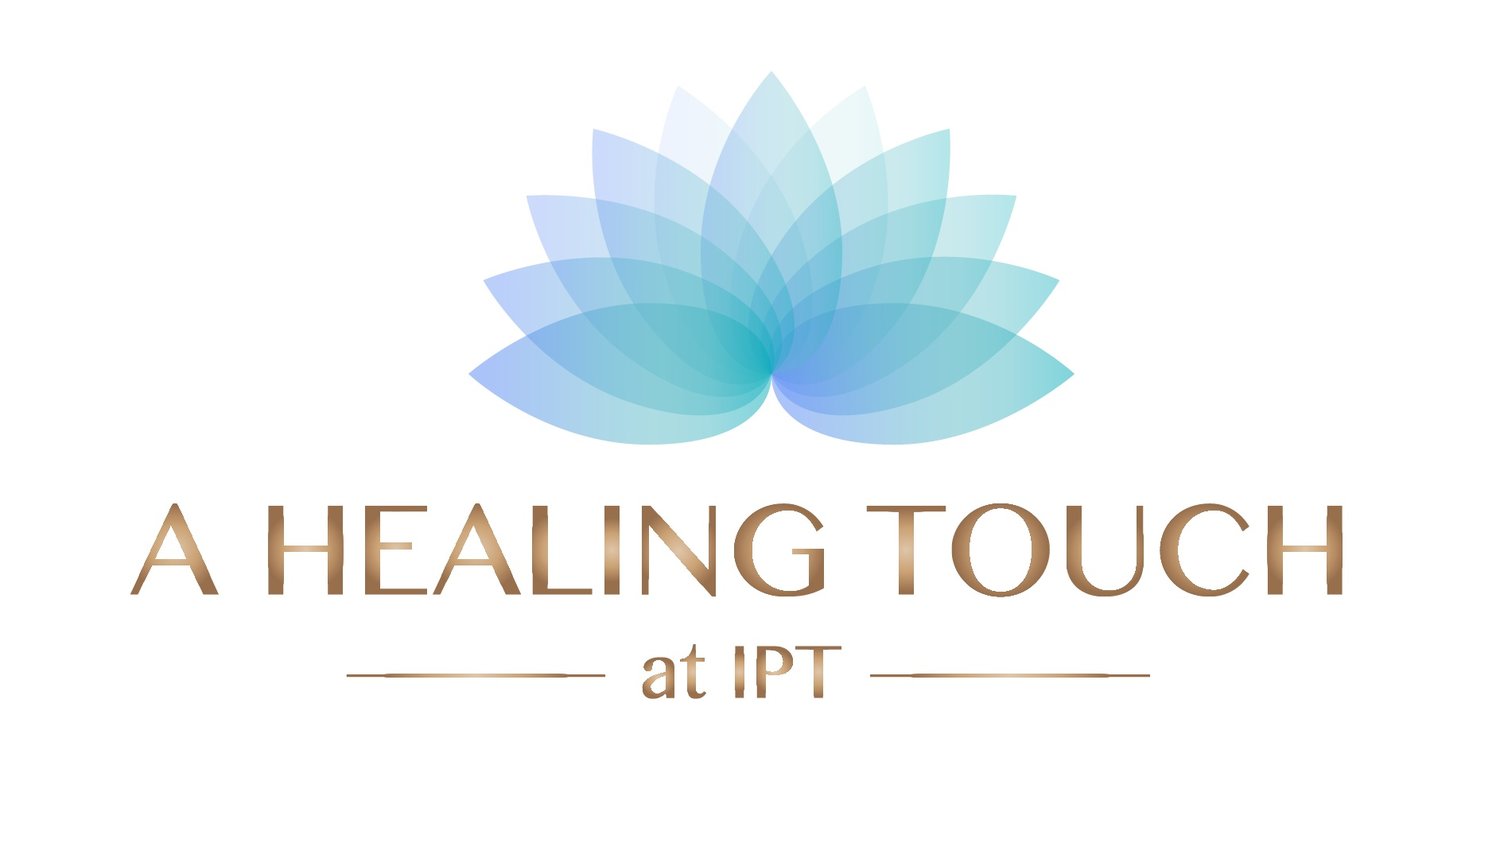 A Healing Touch at IPT | Natural and Organic Spa & Salon Services | Howell, NJ